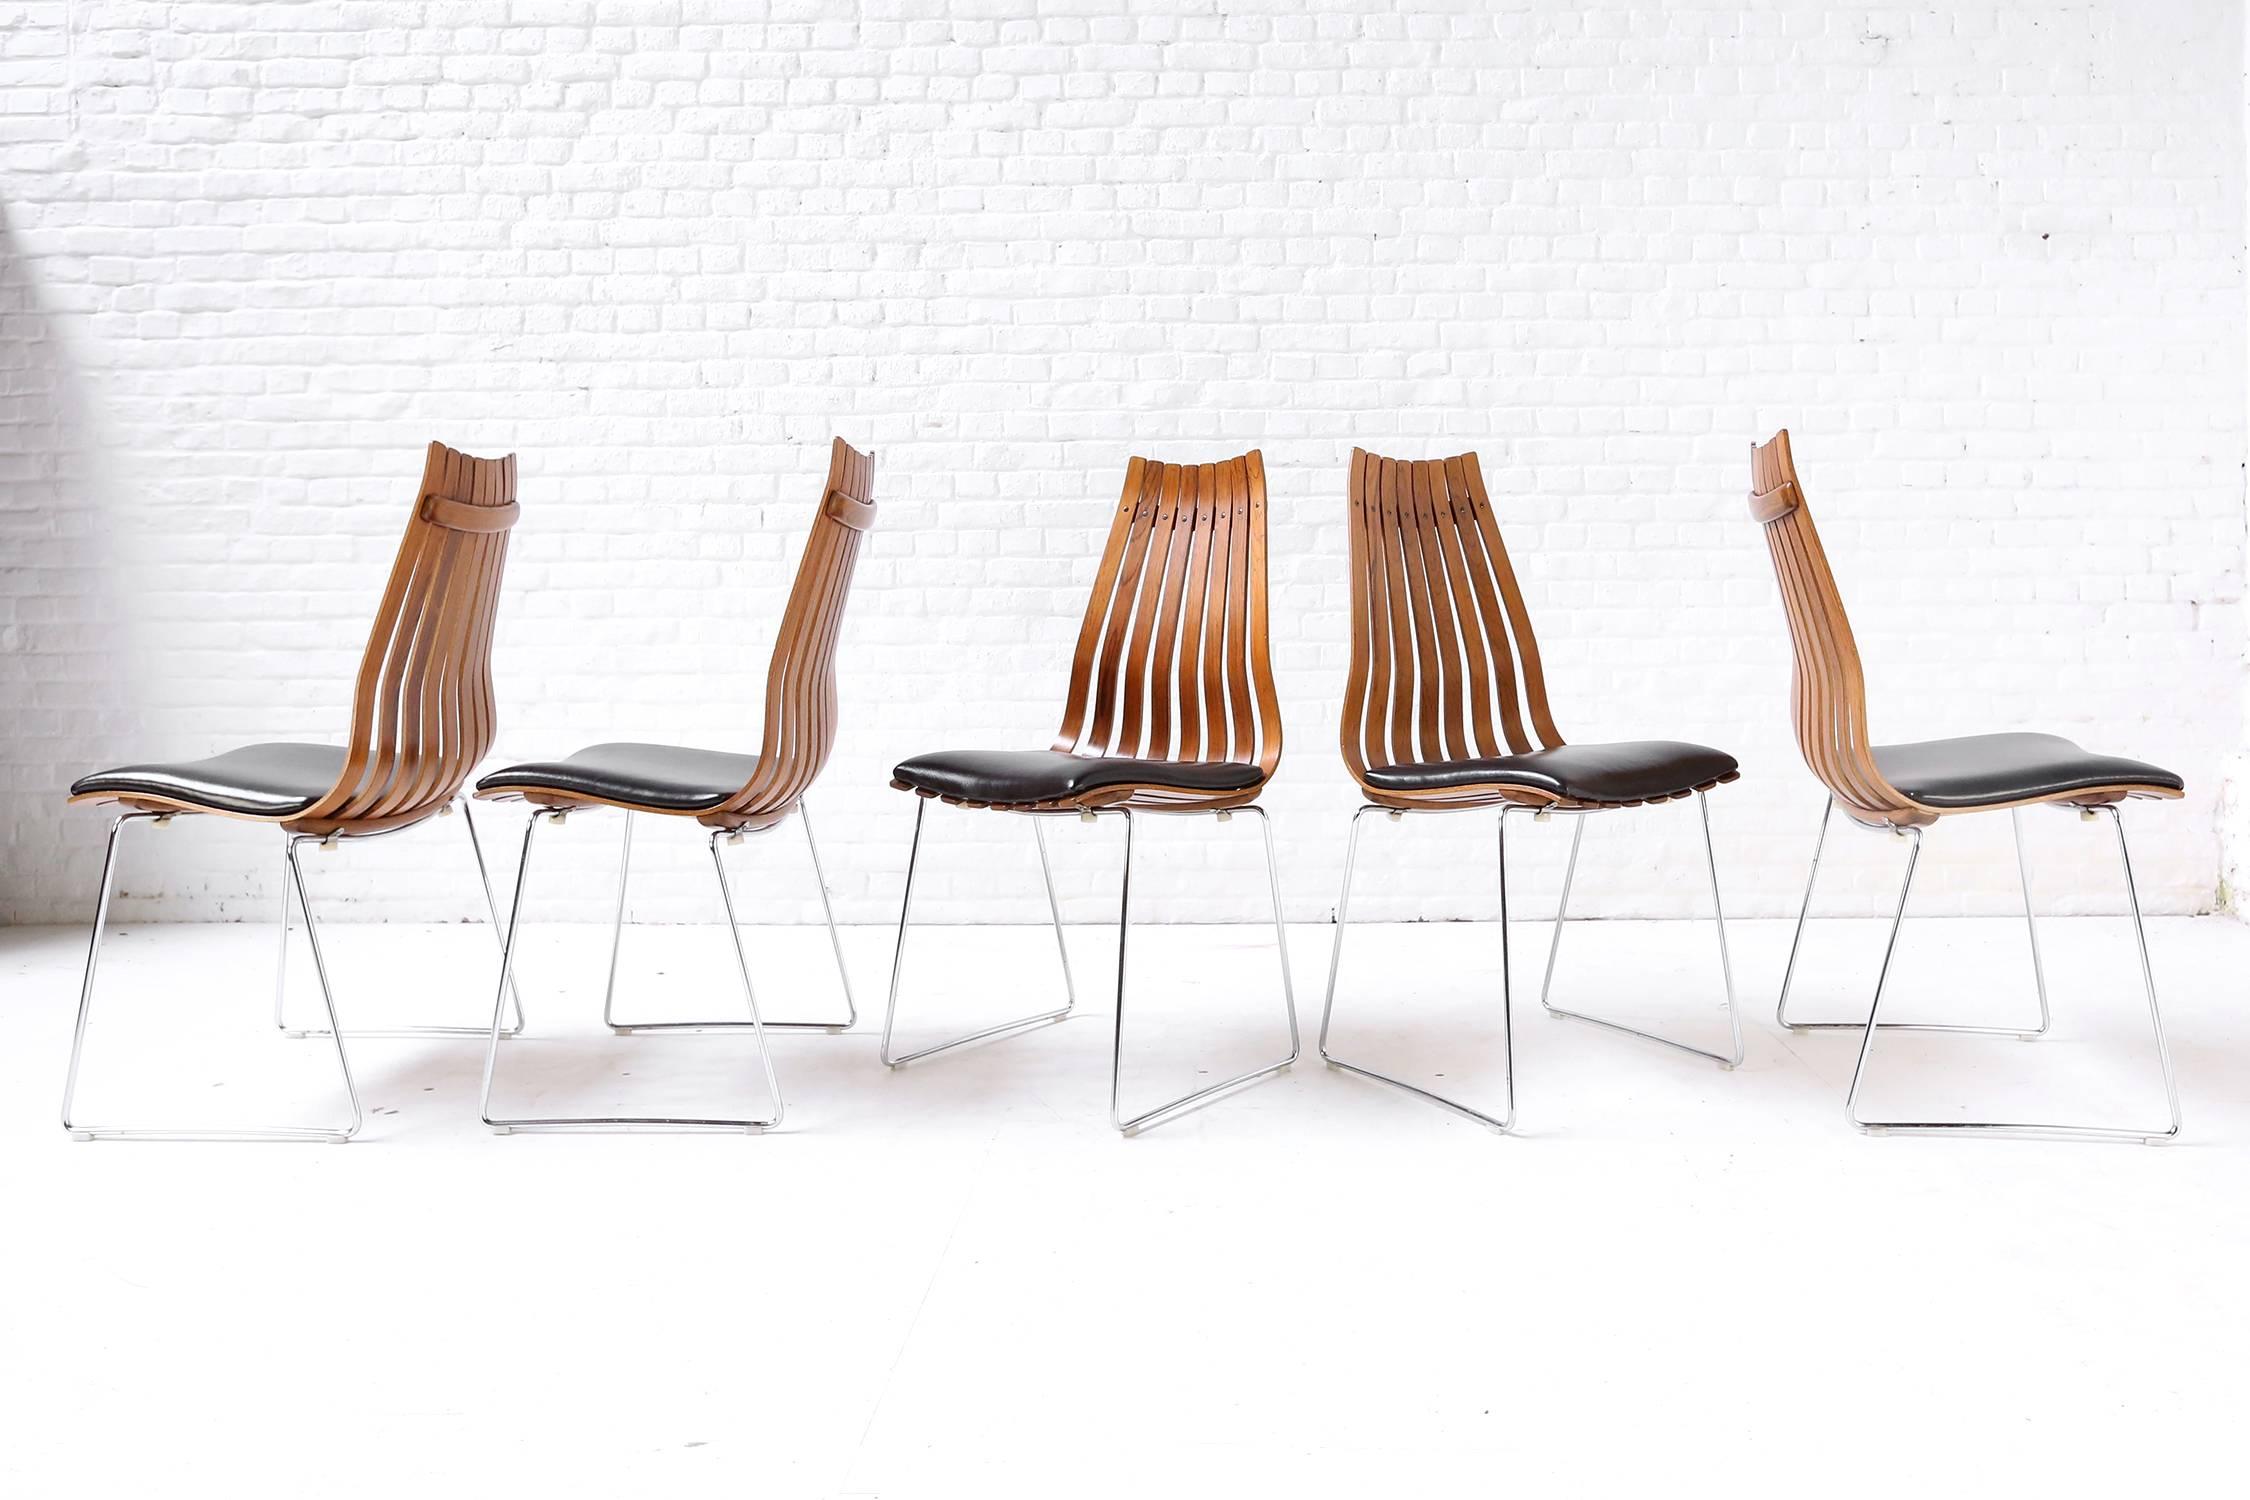 A set of five Hans Brattrud Scandia chairs for Hove Mobler

A classic example of Mid-Century Scandinavian design.
Dating to 1958 and one of the finest chairs to emerge from post war Norway.
Long out of production. Elegant, organic and